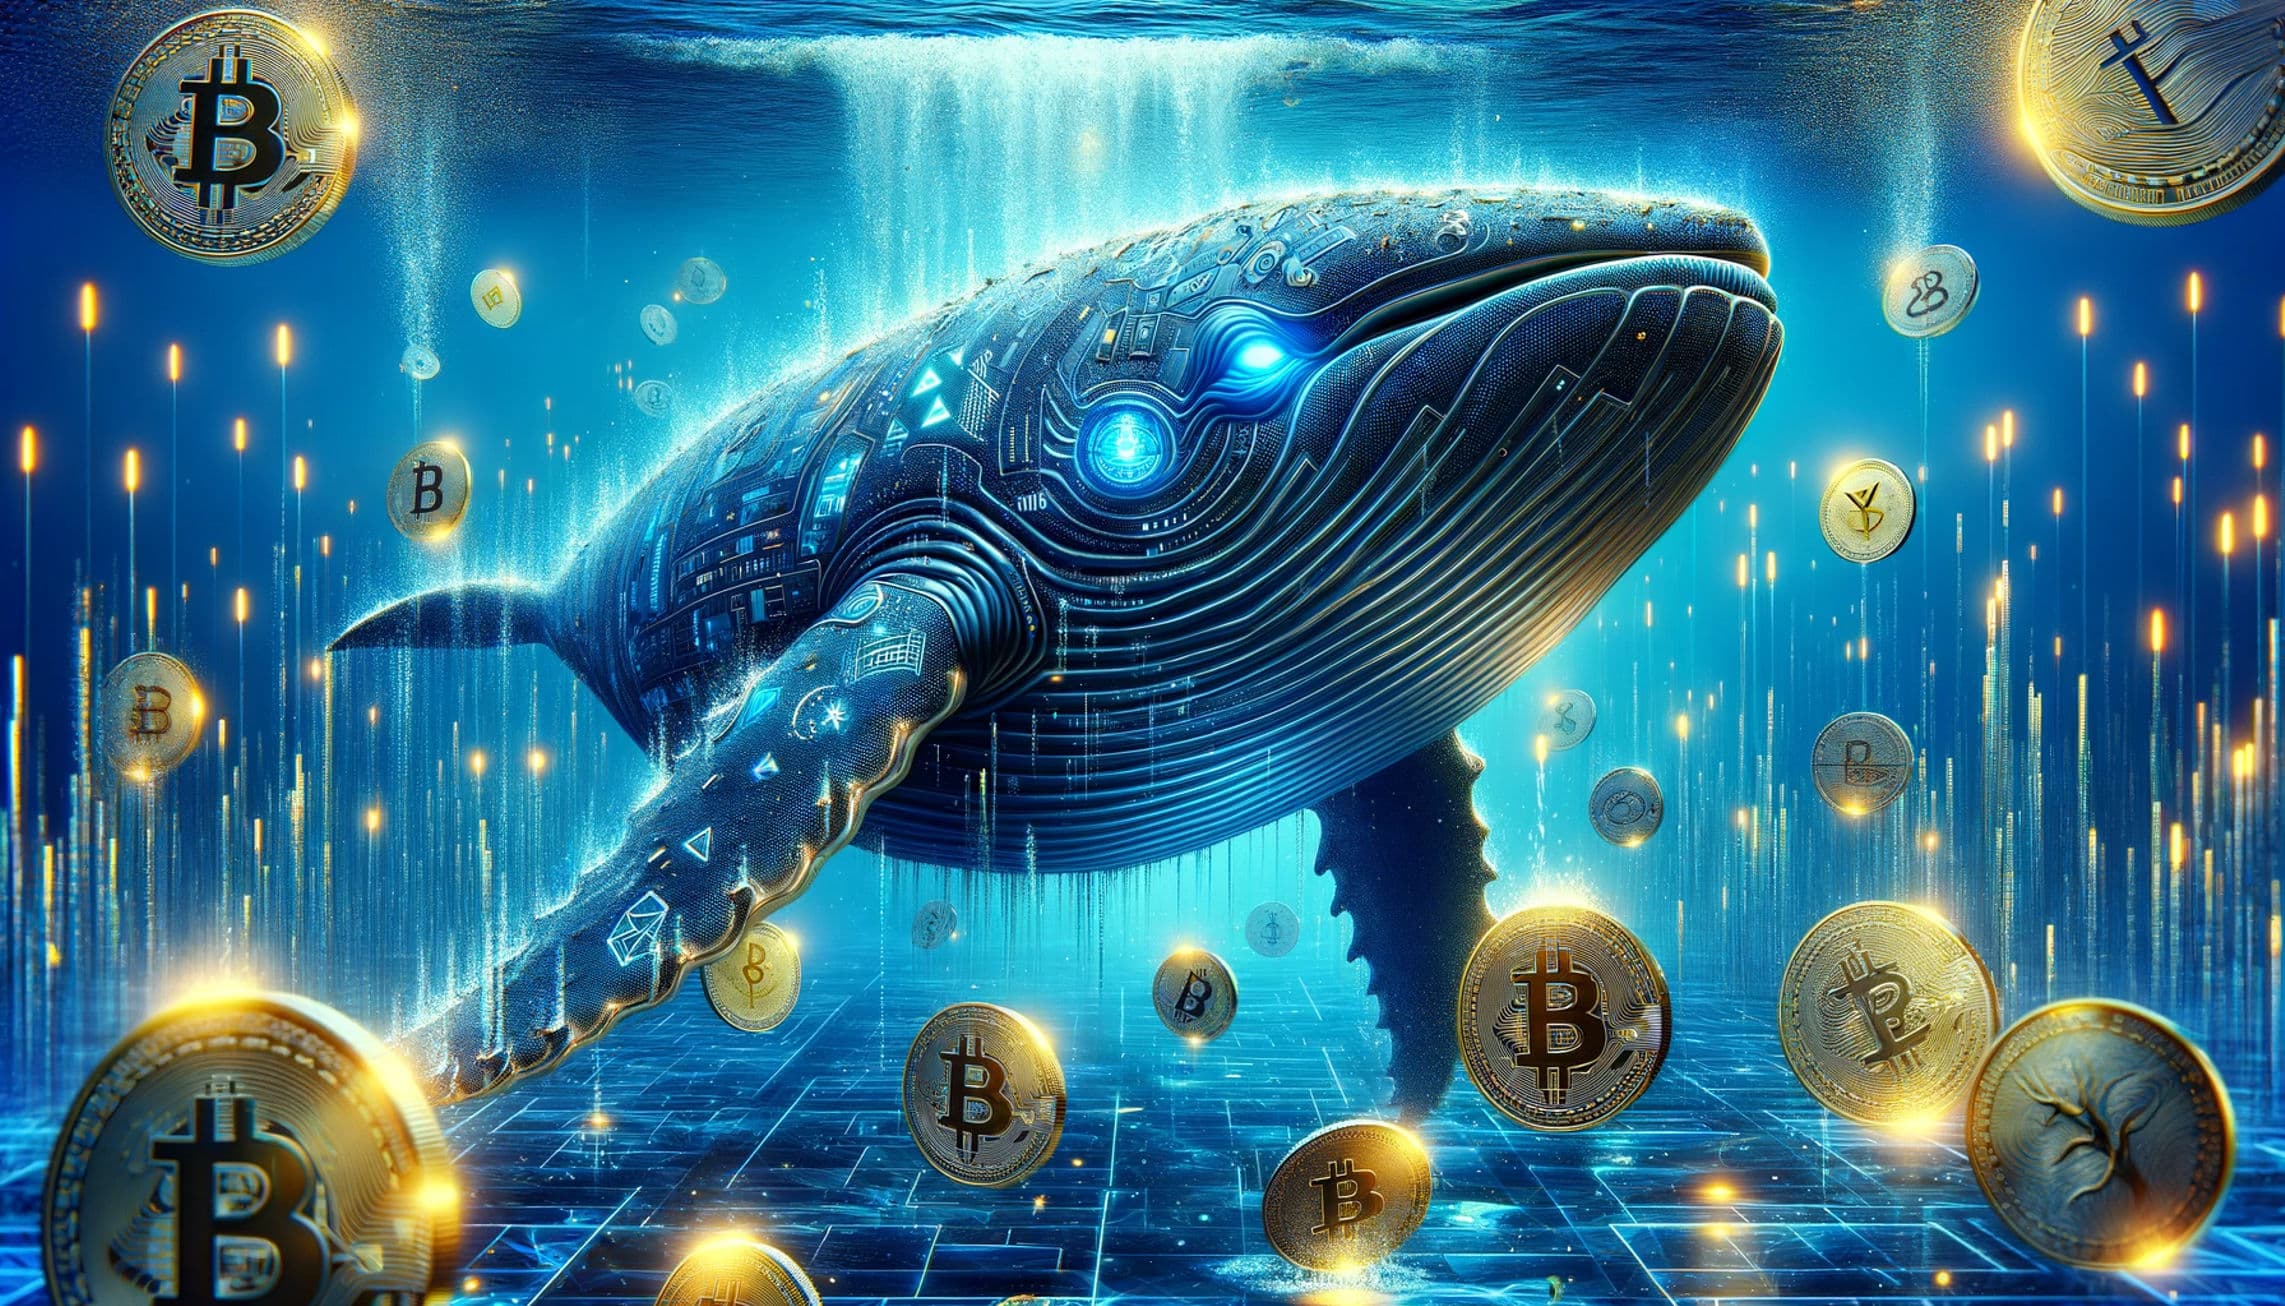  A mechanical whale swims in a digital sea with scattered cryptocurrency coins against a glowing circuit-like backdrop.